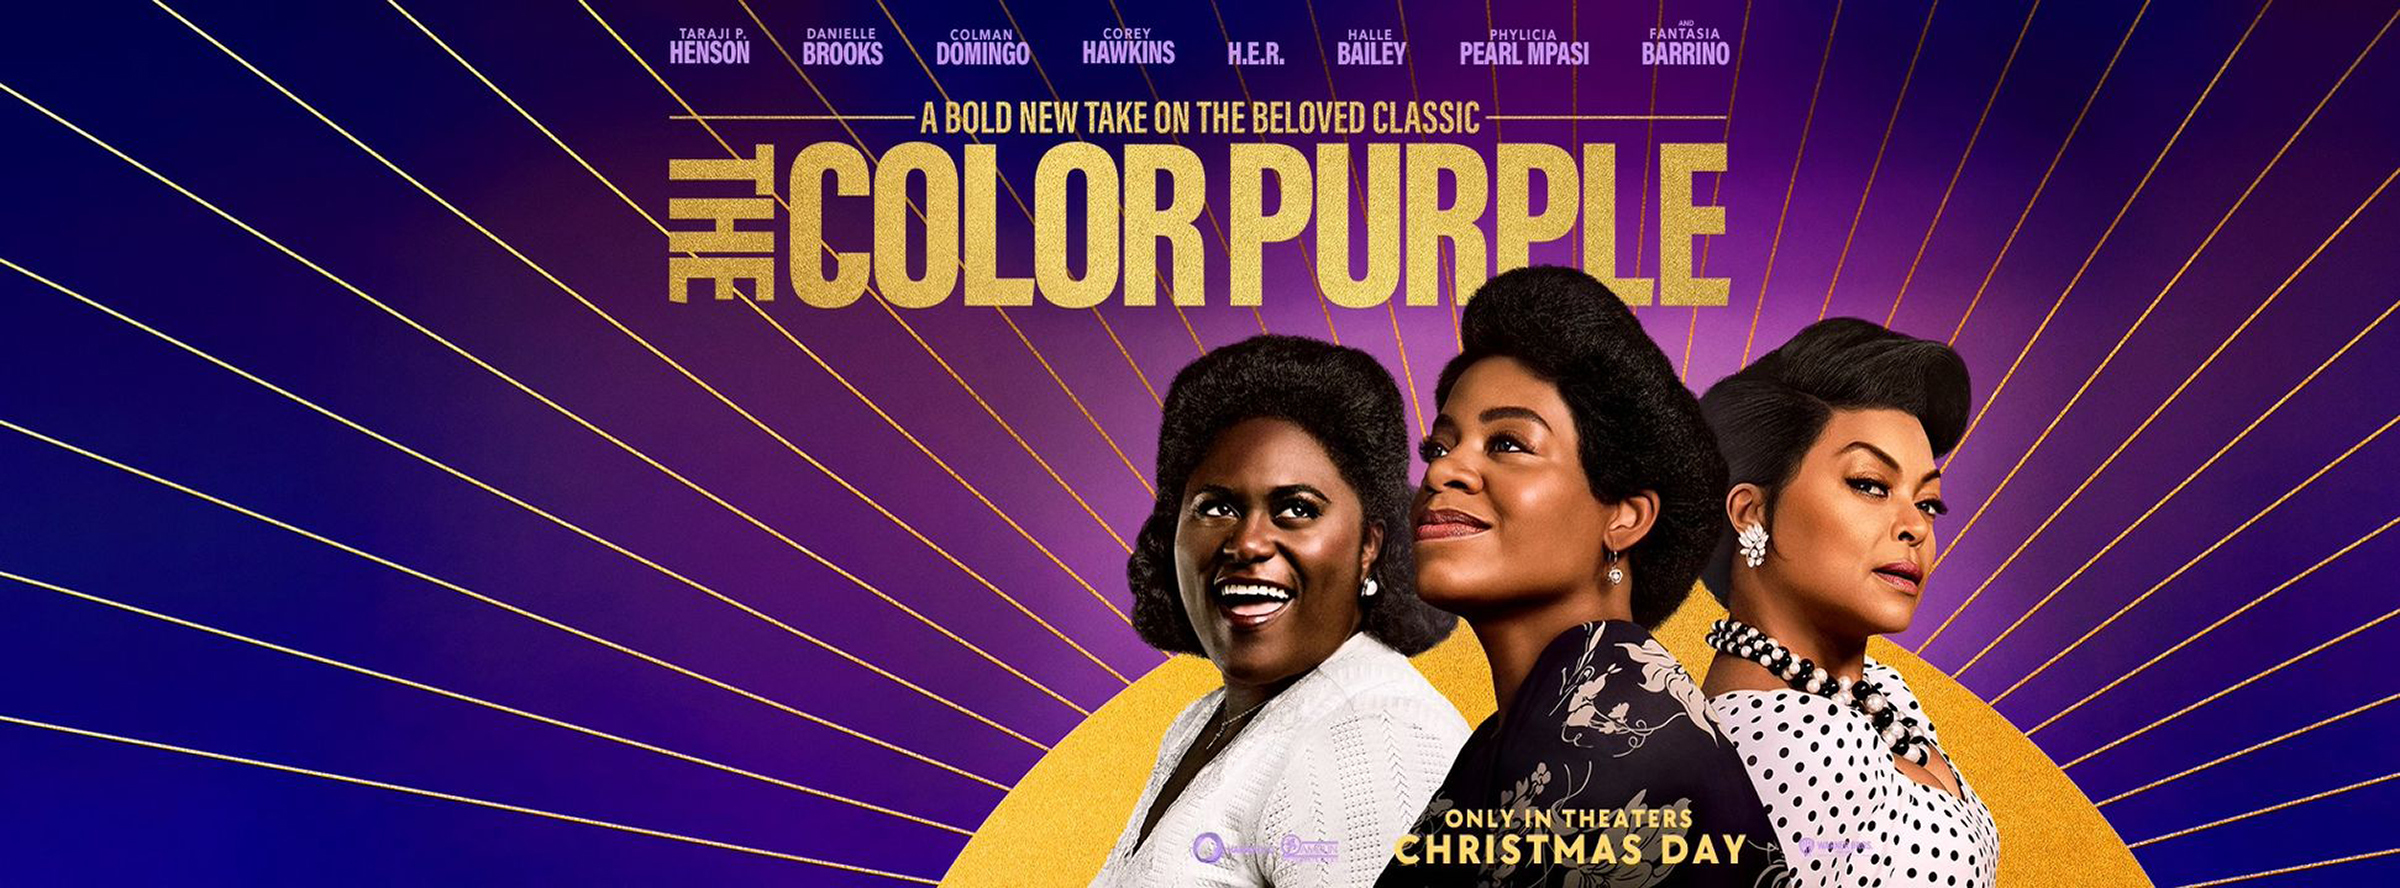 Slider Image for The Color Purple